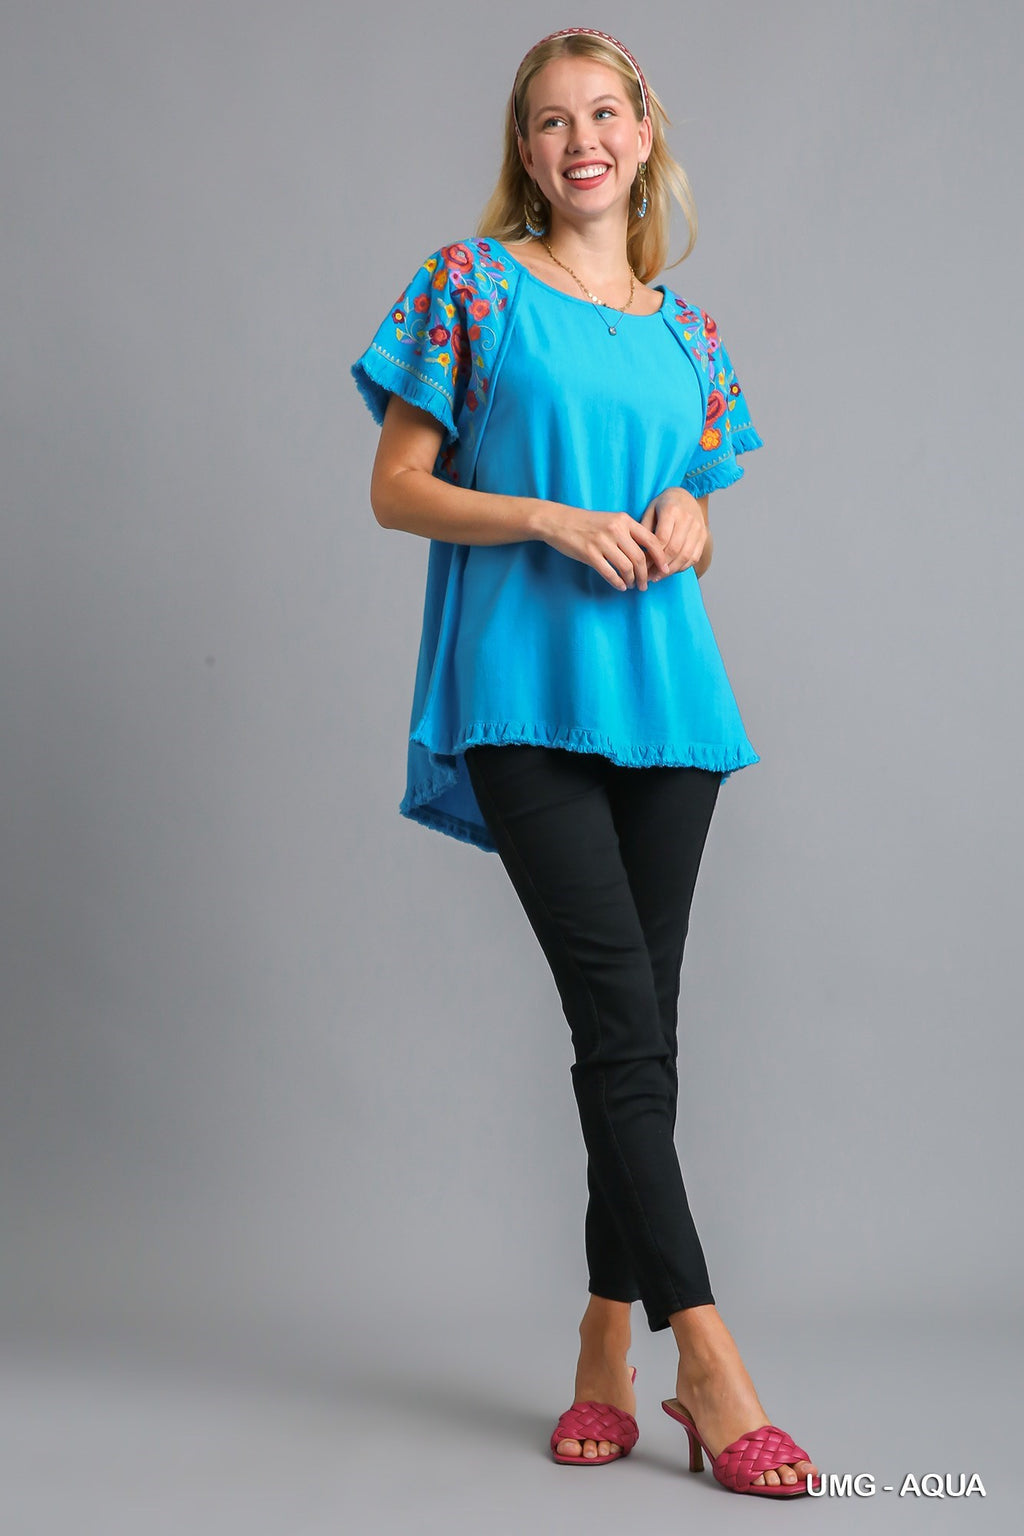 Turquoise Floral Embroidered  Umgee Top with Round Neck and Frayed Edge Hem